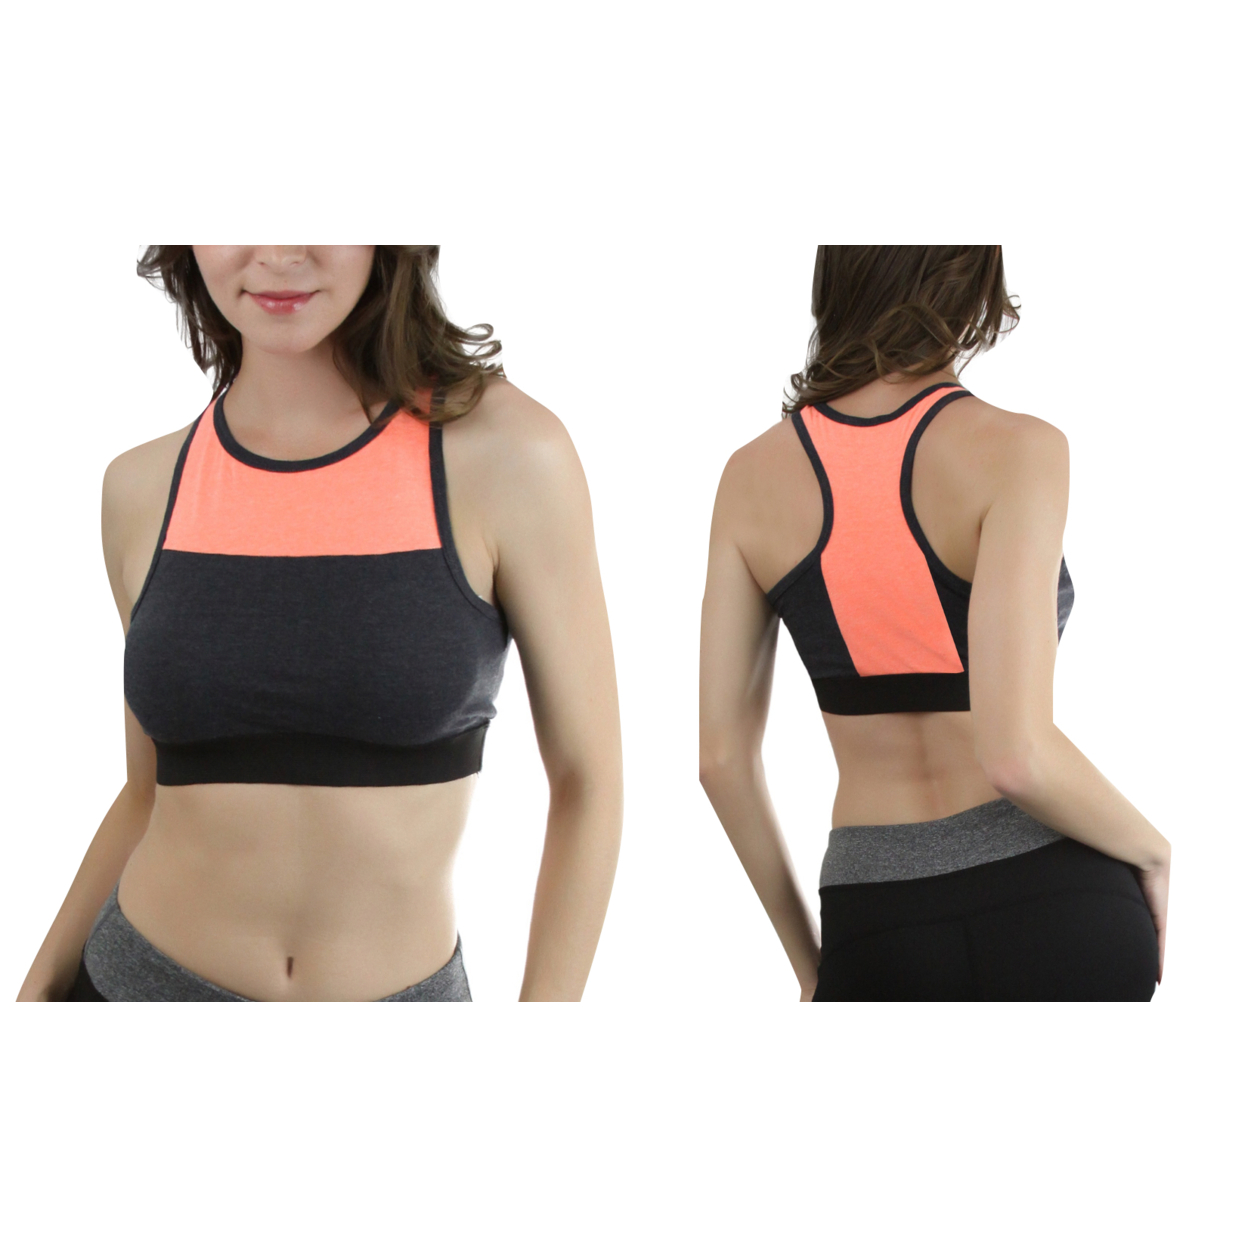 Single Or 2-Pack Of Women's Color-Block Two Tone Cotton-Blend Bra - Charcoal/Neon Coral, Small